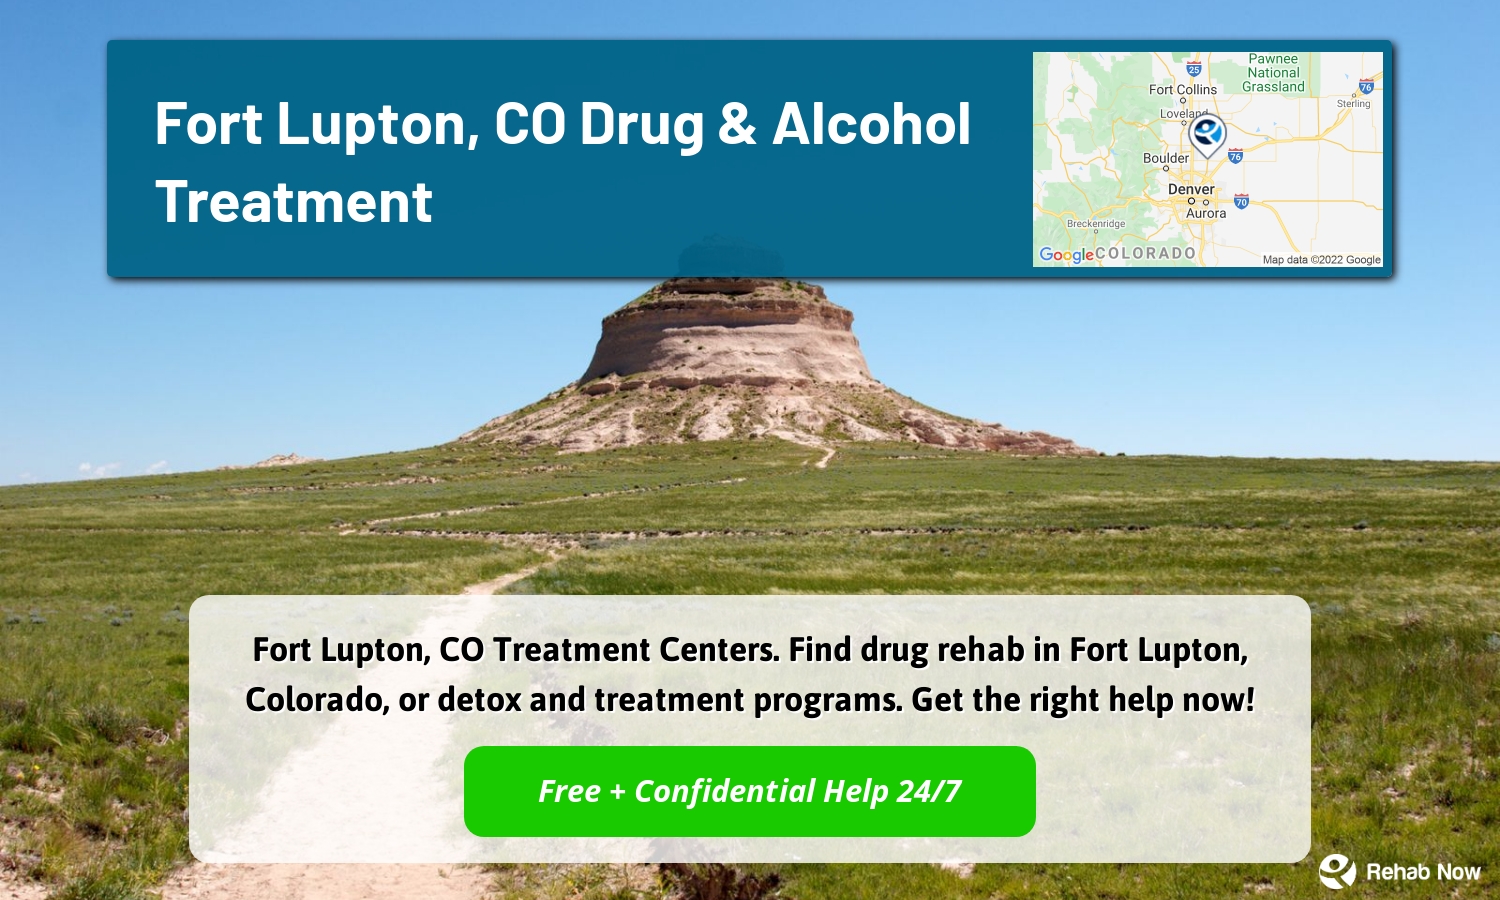 Fort Lupton, CO Treatment Centers. Find drug rehab in Fort Lupton, Colorado, or detox and treatment programs. Get the right help now!